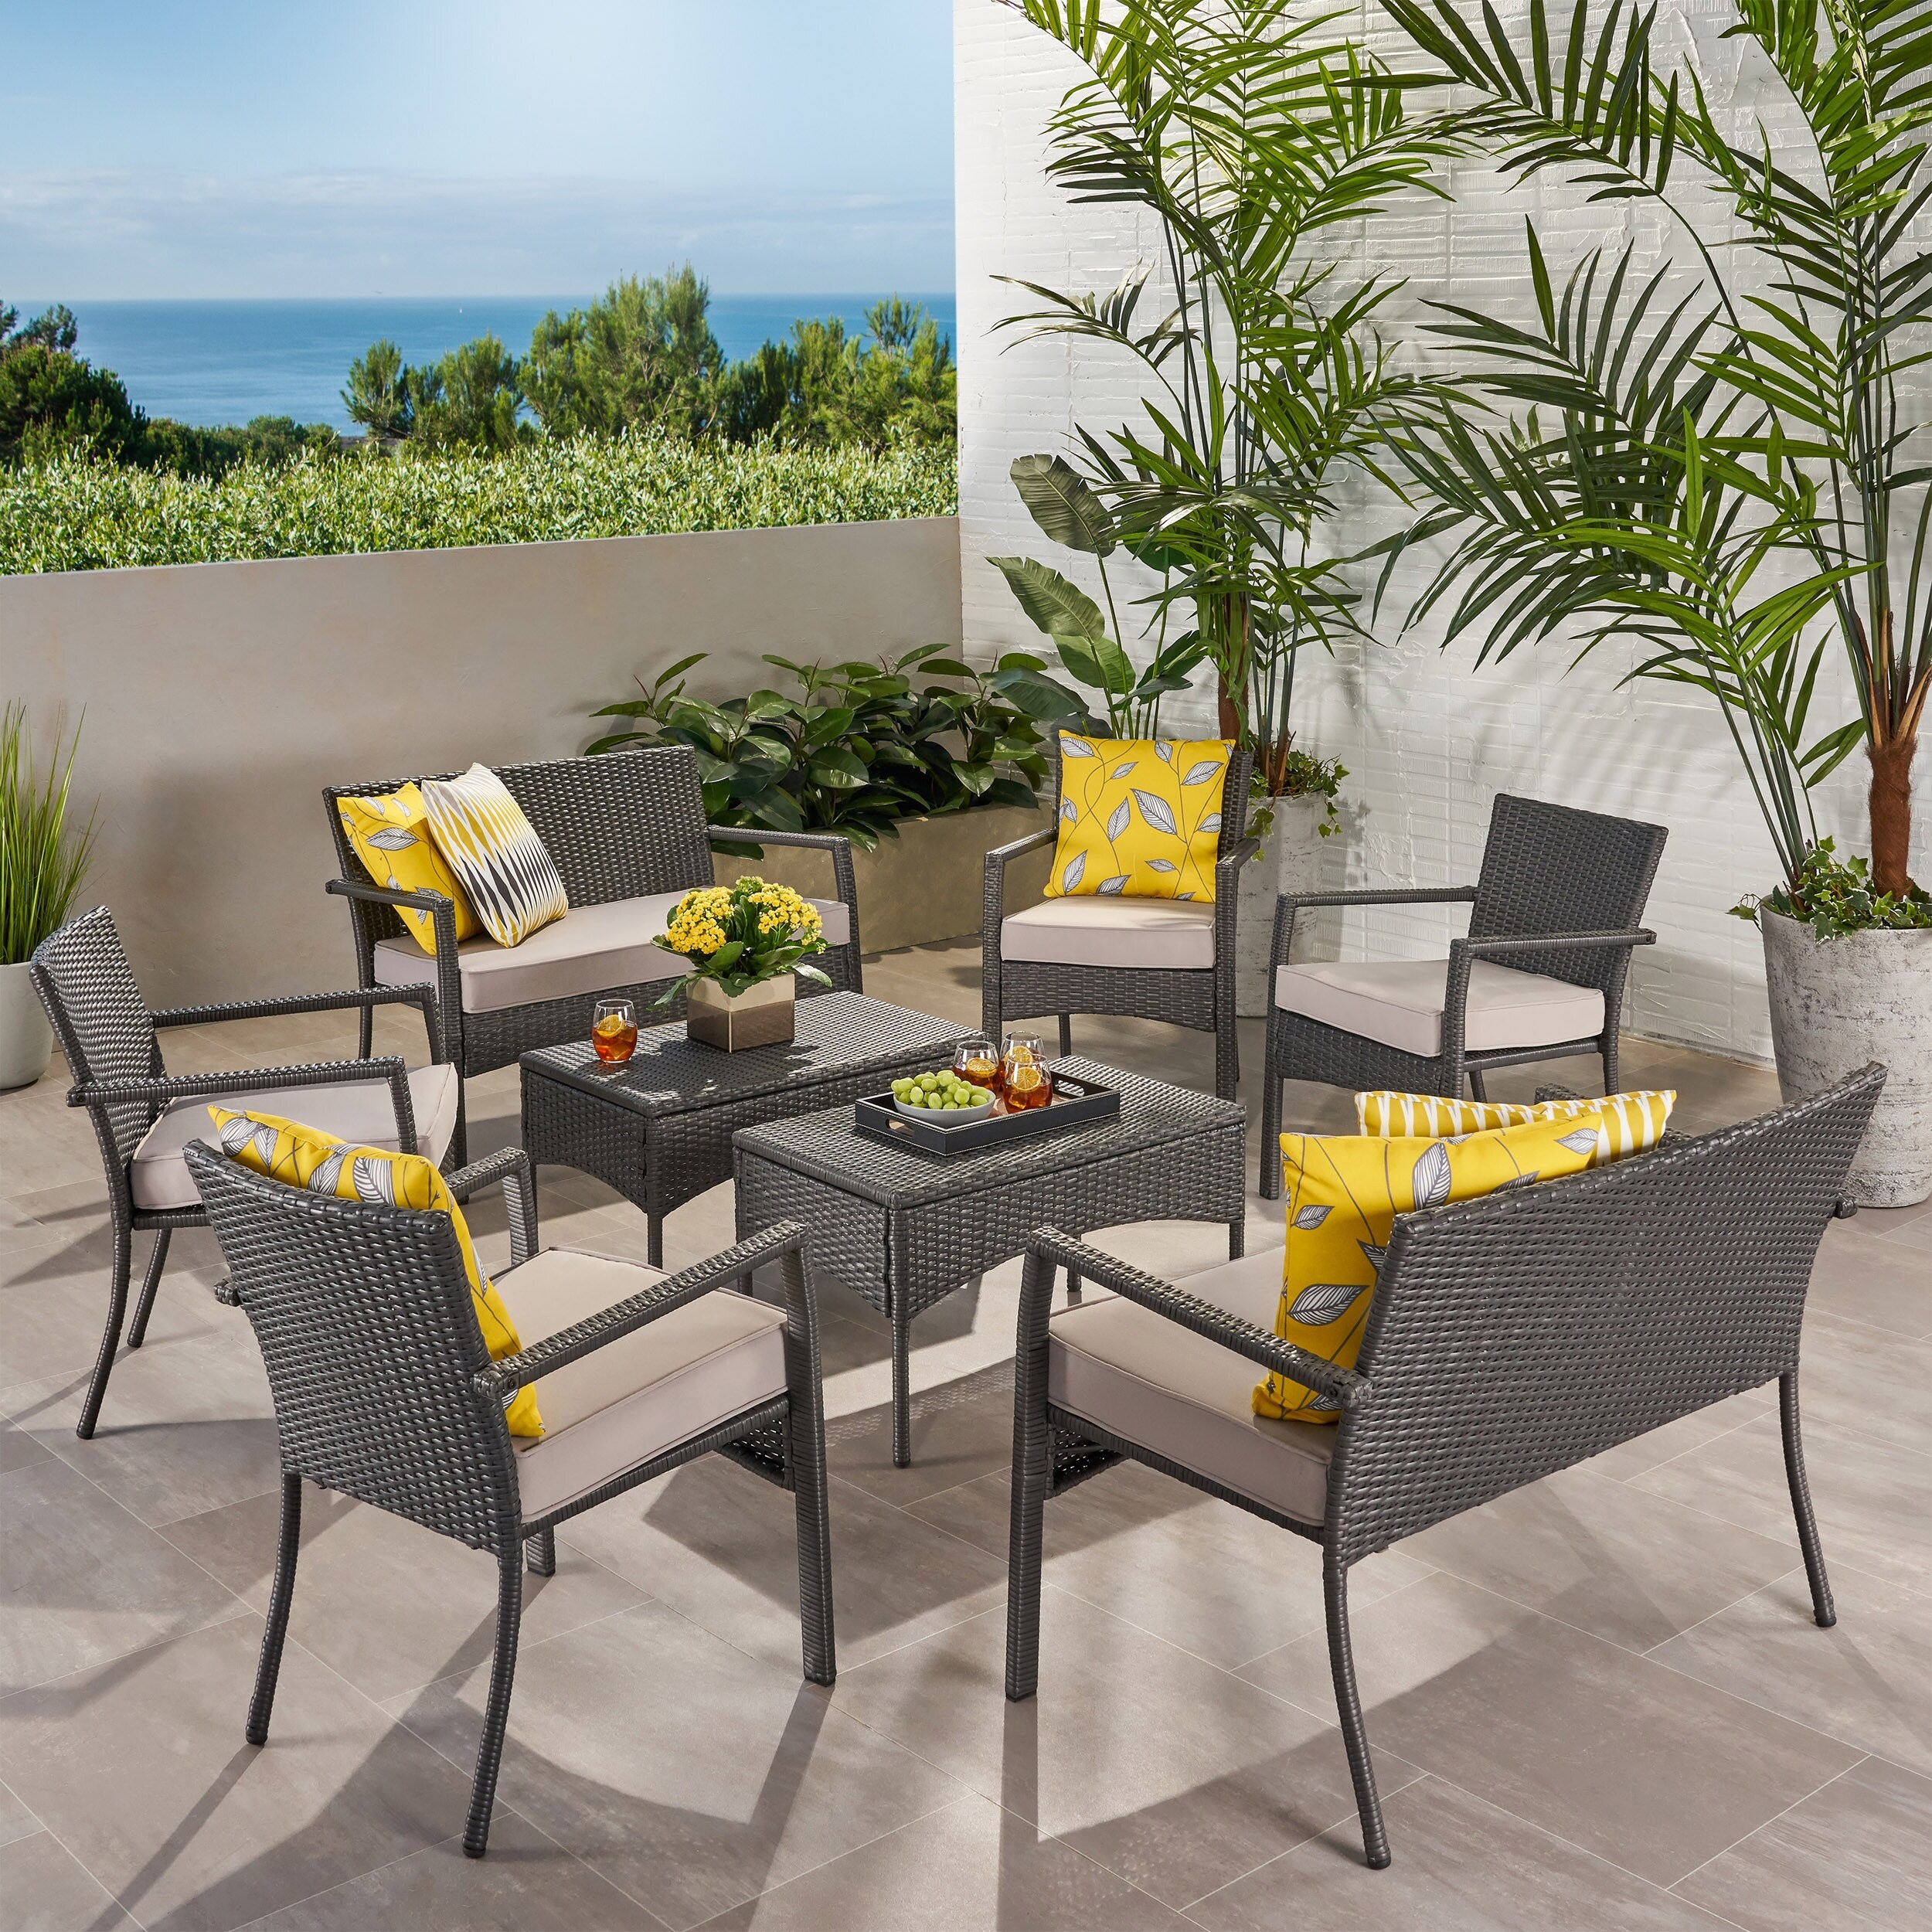 Cancun Outdoor 8-piece Cushioned Wicker Chat Set by Christopher Knight Home - Multibrown + Dark Cream Cushion